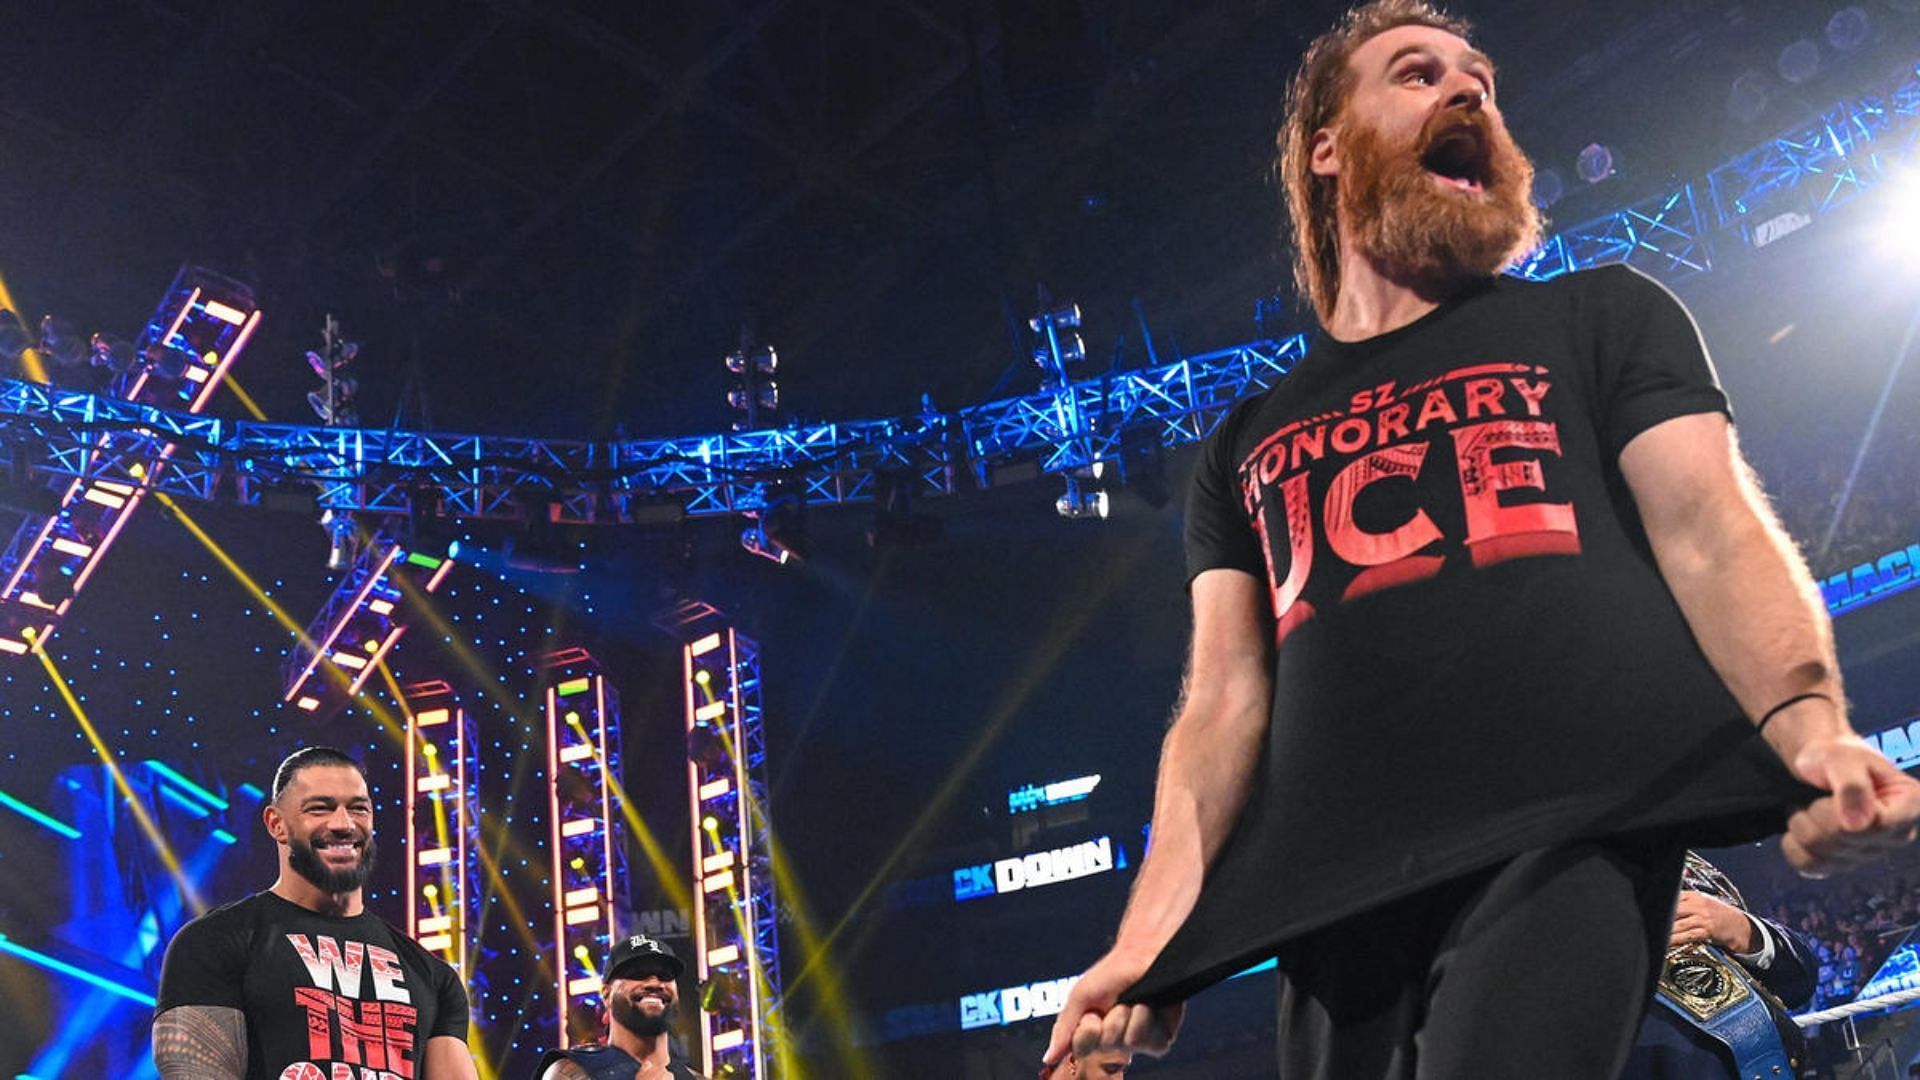 Sami Zayn was declared an &quot;Honorary Uce&quot; of the Bloodline earlier this year